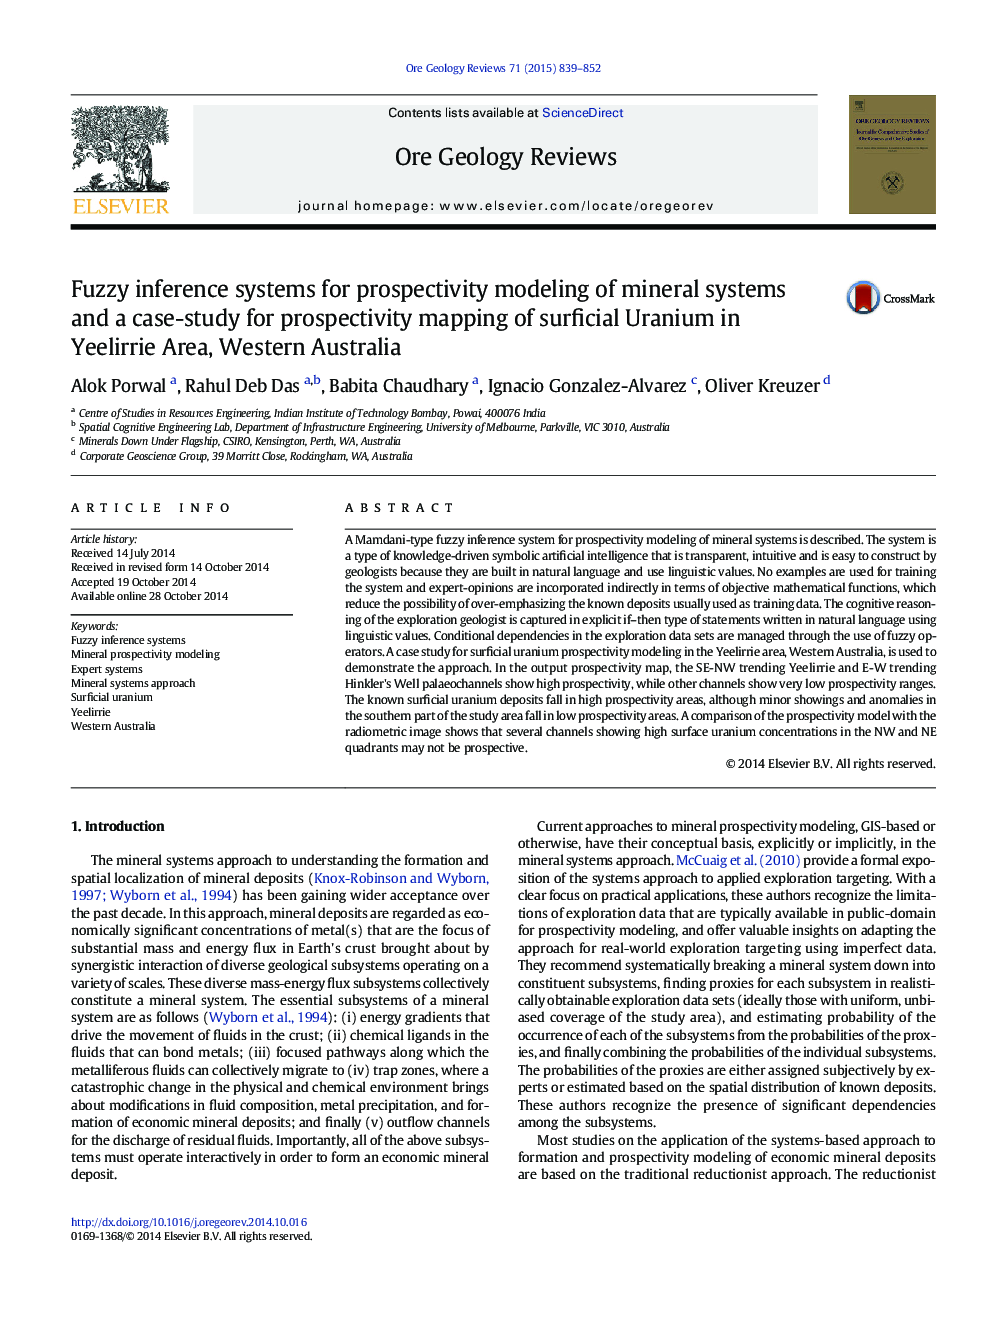 Fuzzy inference systems for prospectivity modeling of mineral systems and a case-study for prospectivity mapping of surficial Uranium in Yeelirrie Area, Western Australia